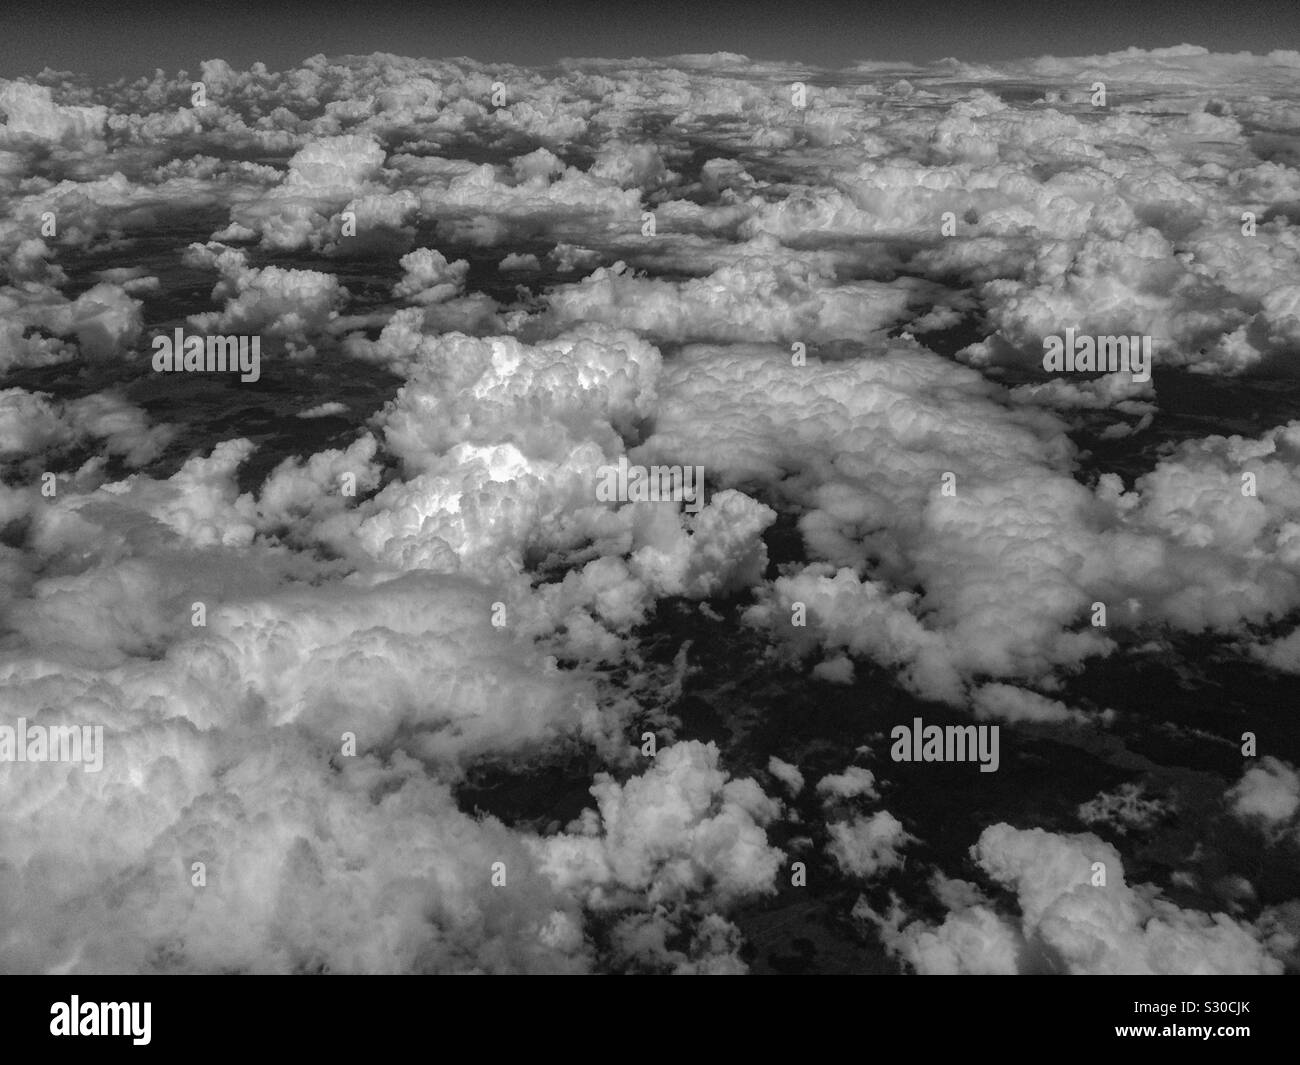 Clouds over the Great Plains of the USA. Monochrome. Flyover state. Stock Photo